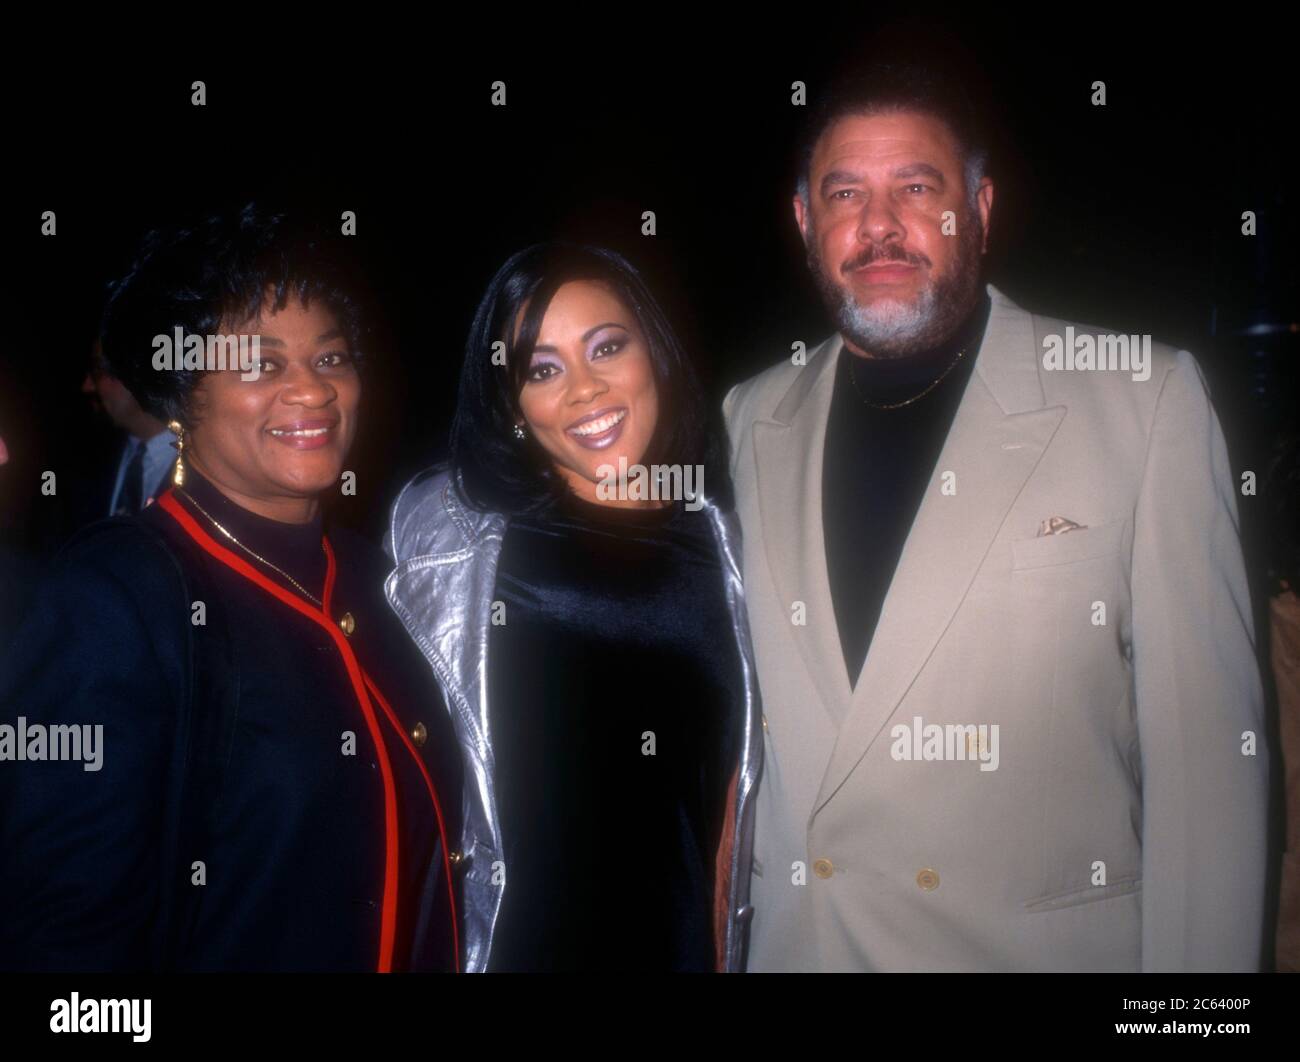 Beverly Hills, California, USA 11th December 1995 Actress Lela Rochon and parents mother Zelma Staples and father Samuel Staples attend 20th Century Fox' 'Waiting To Exhale' Premiere on December 11, 1995 at Samuel Goldwyn Theatre in Beverly Hills, California, USA. Photo by Barry King/Alamy Stock Photo Stock Photo